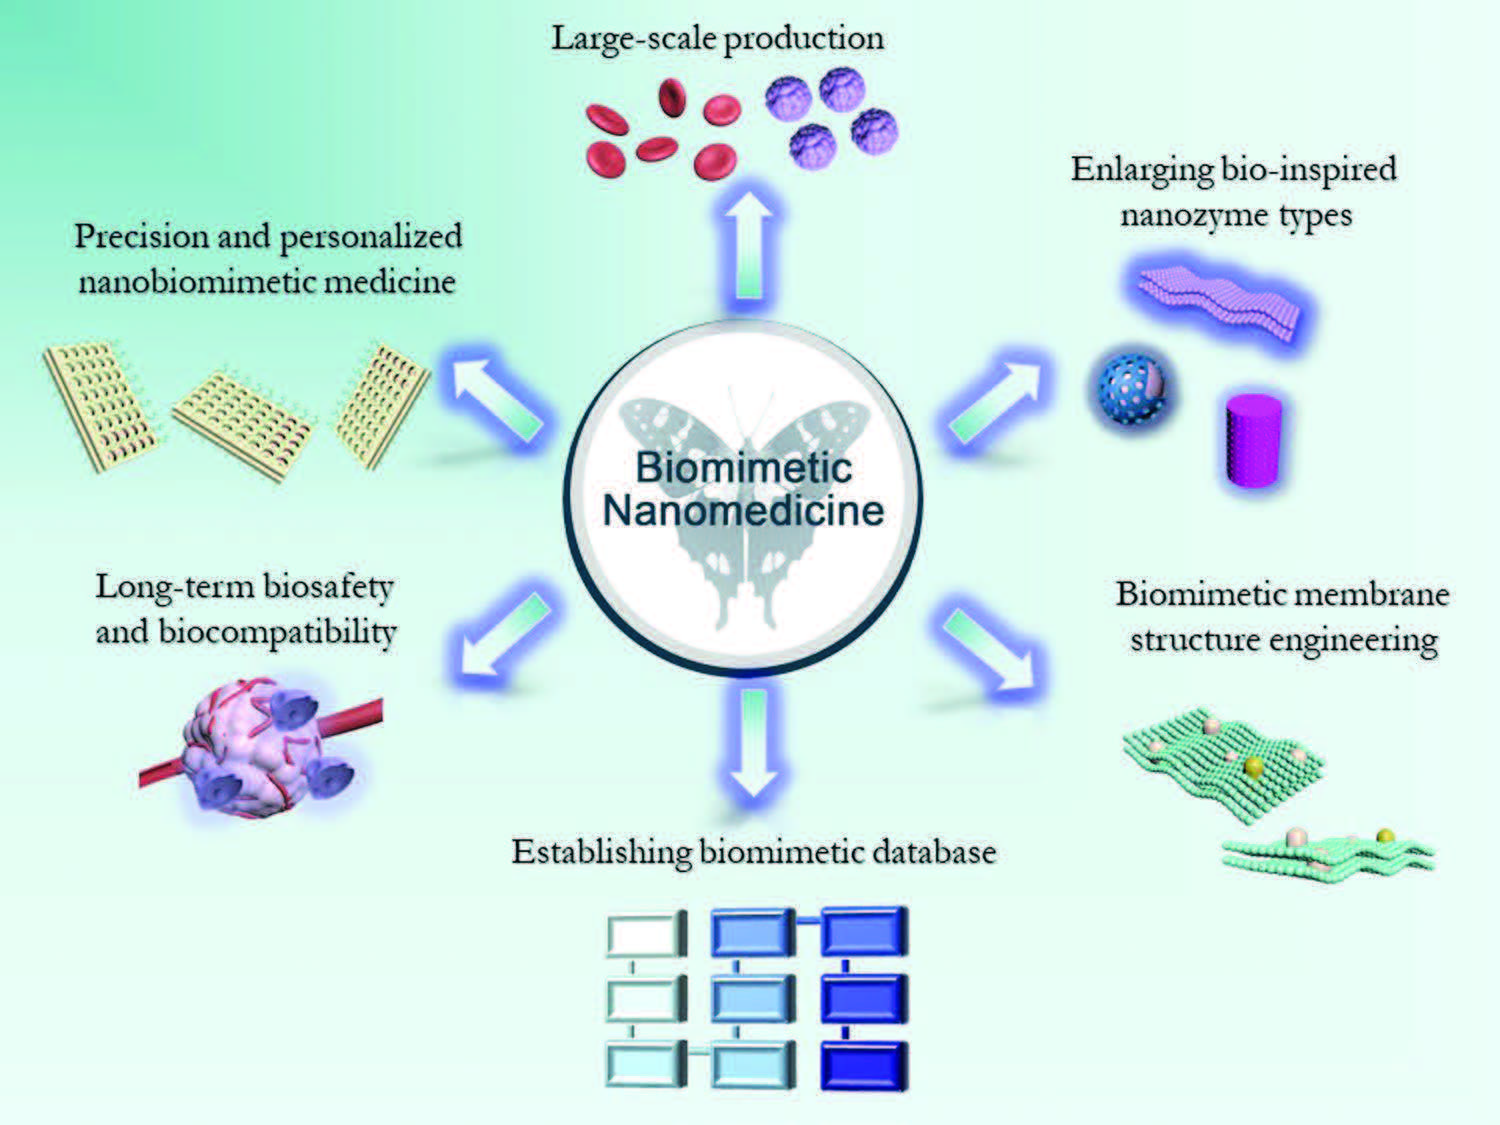 Schematic illustration of the development and challenges of nanobiomimetic medicine